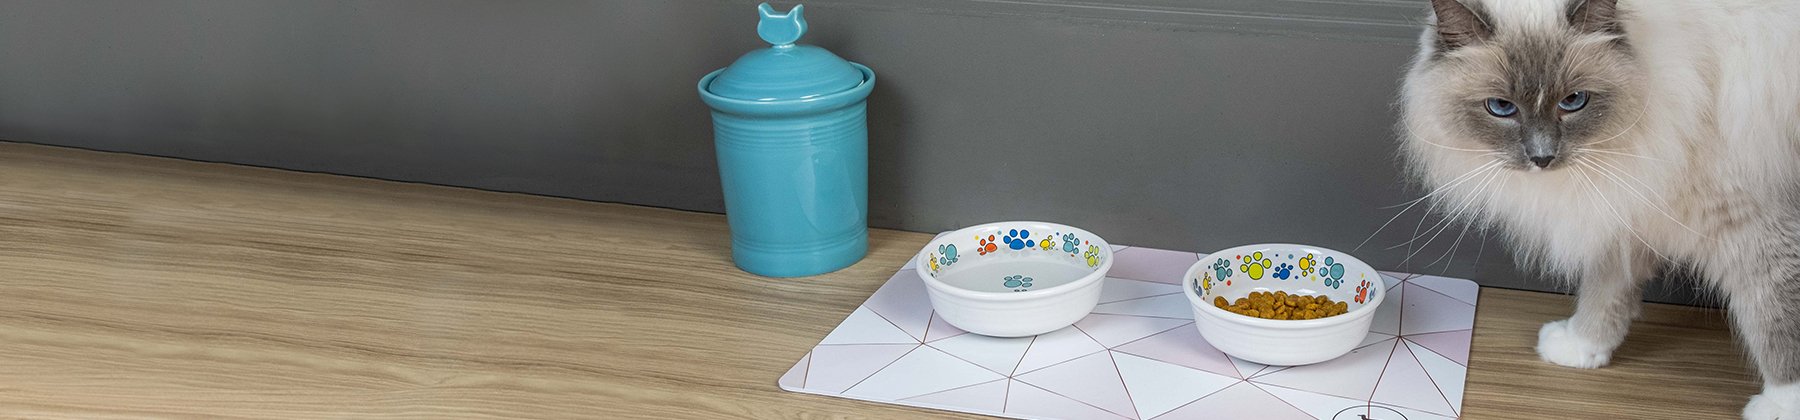 Photo of Park Life Designs mat and Fiesta pet bowls and pet canister.